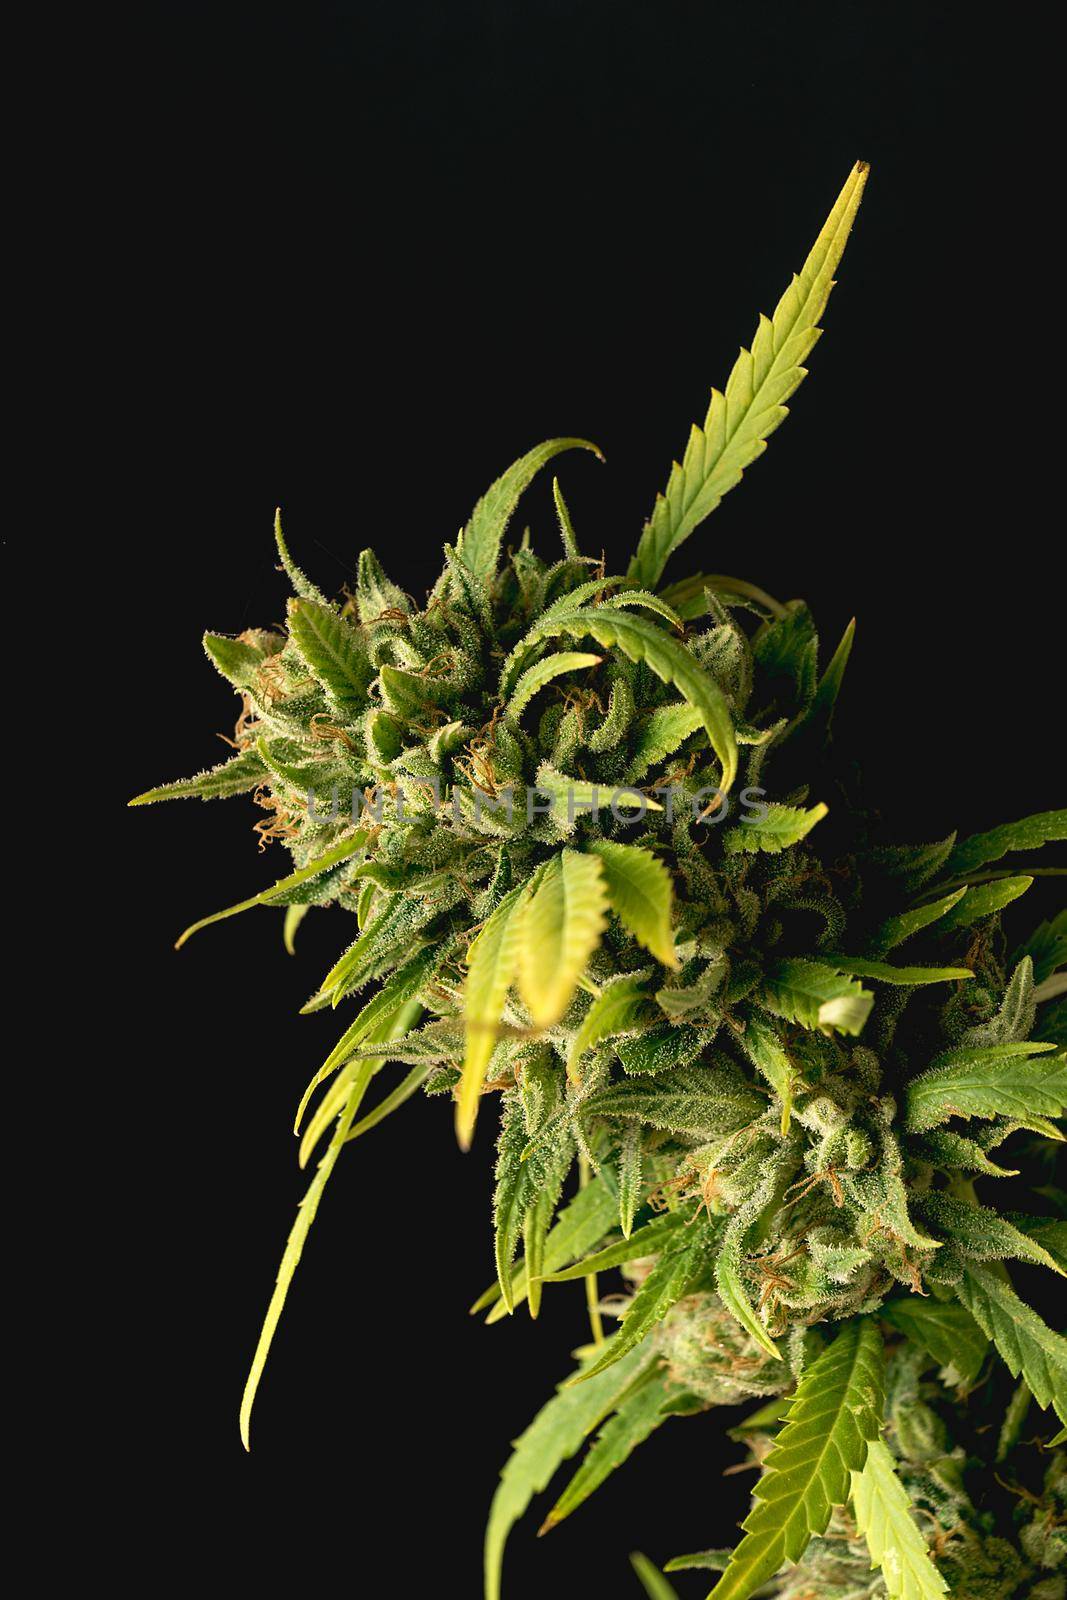 Vertical detail image of cannabis plant buds on black background with side lighting